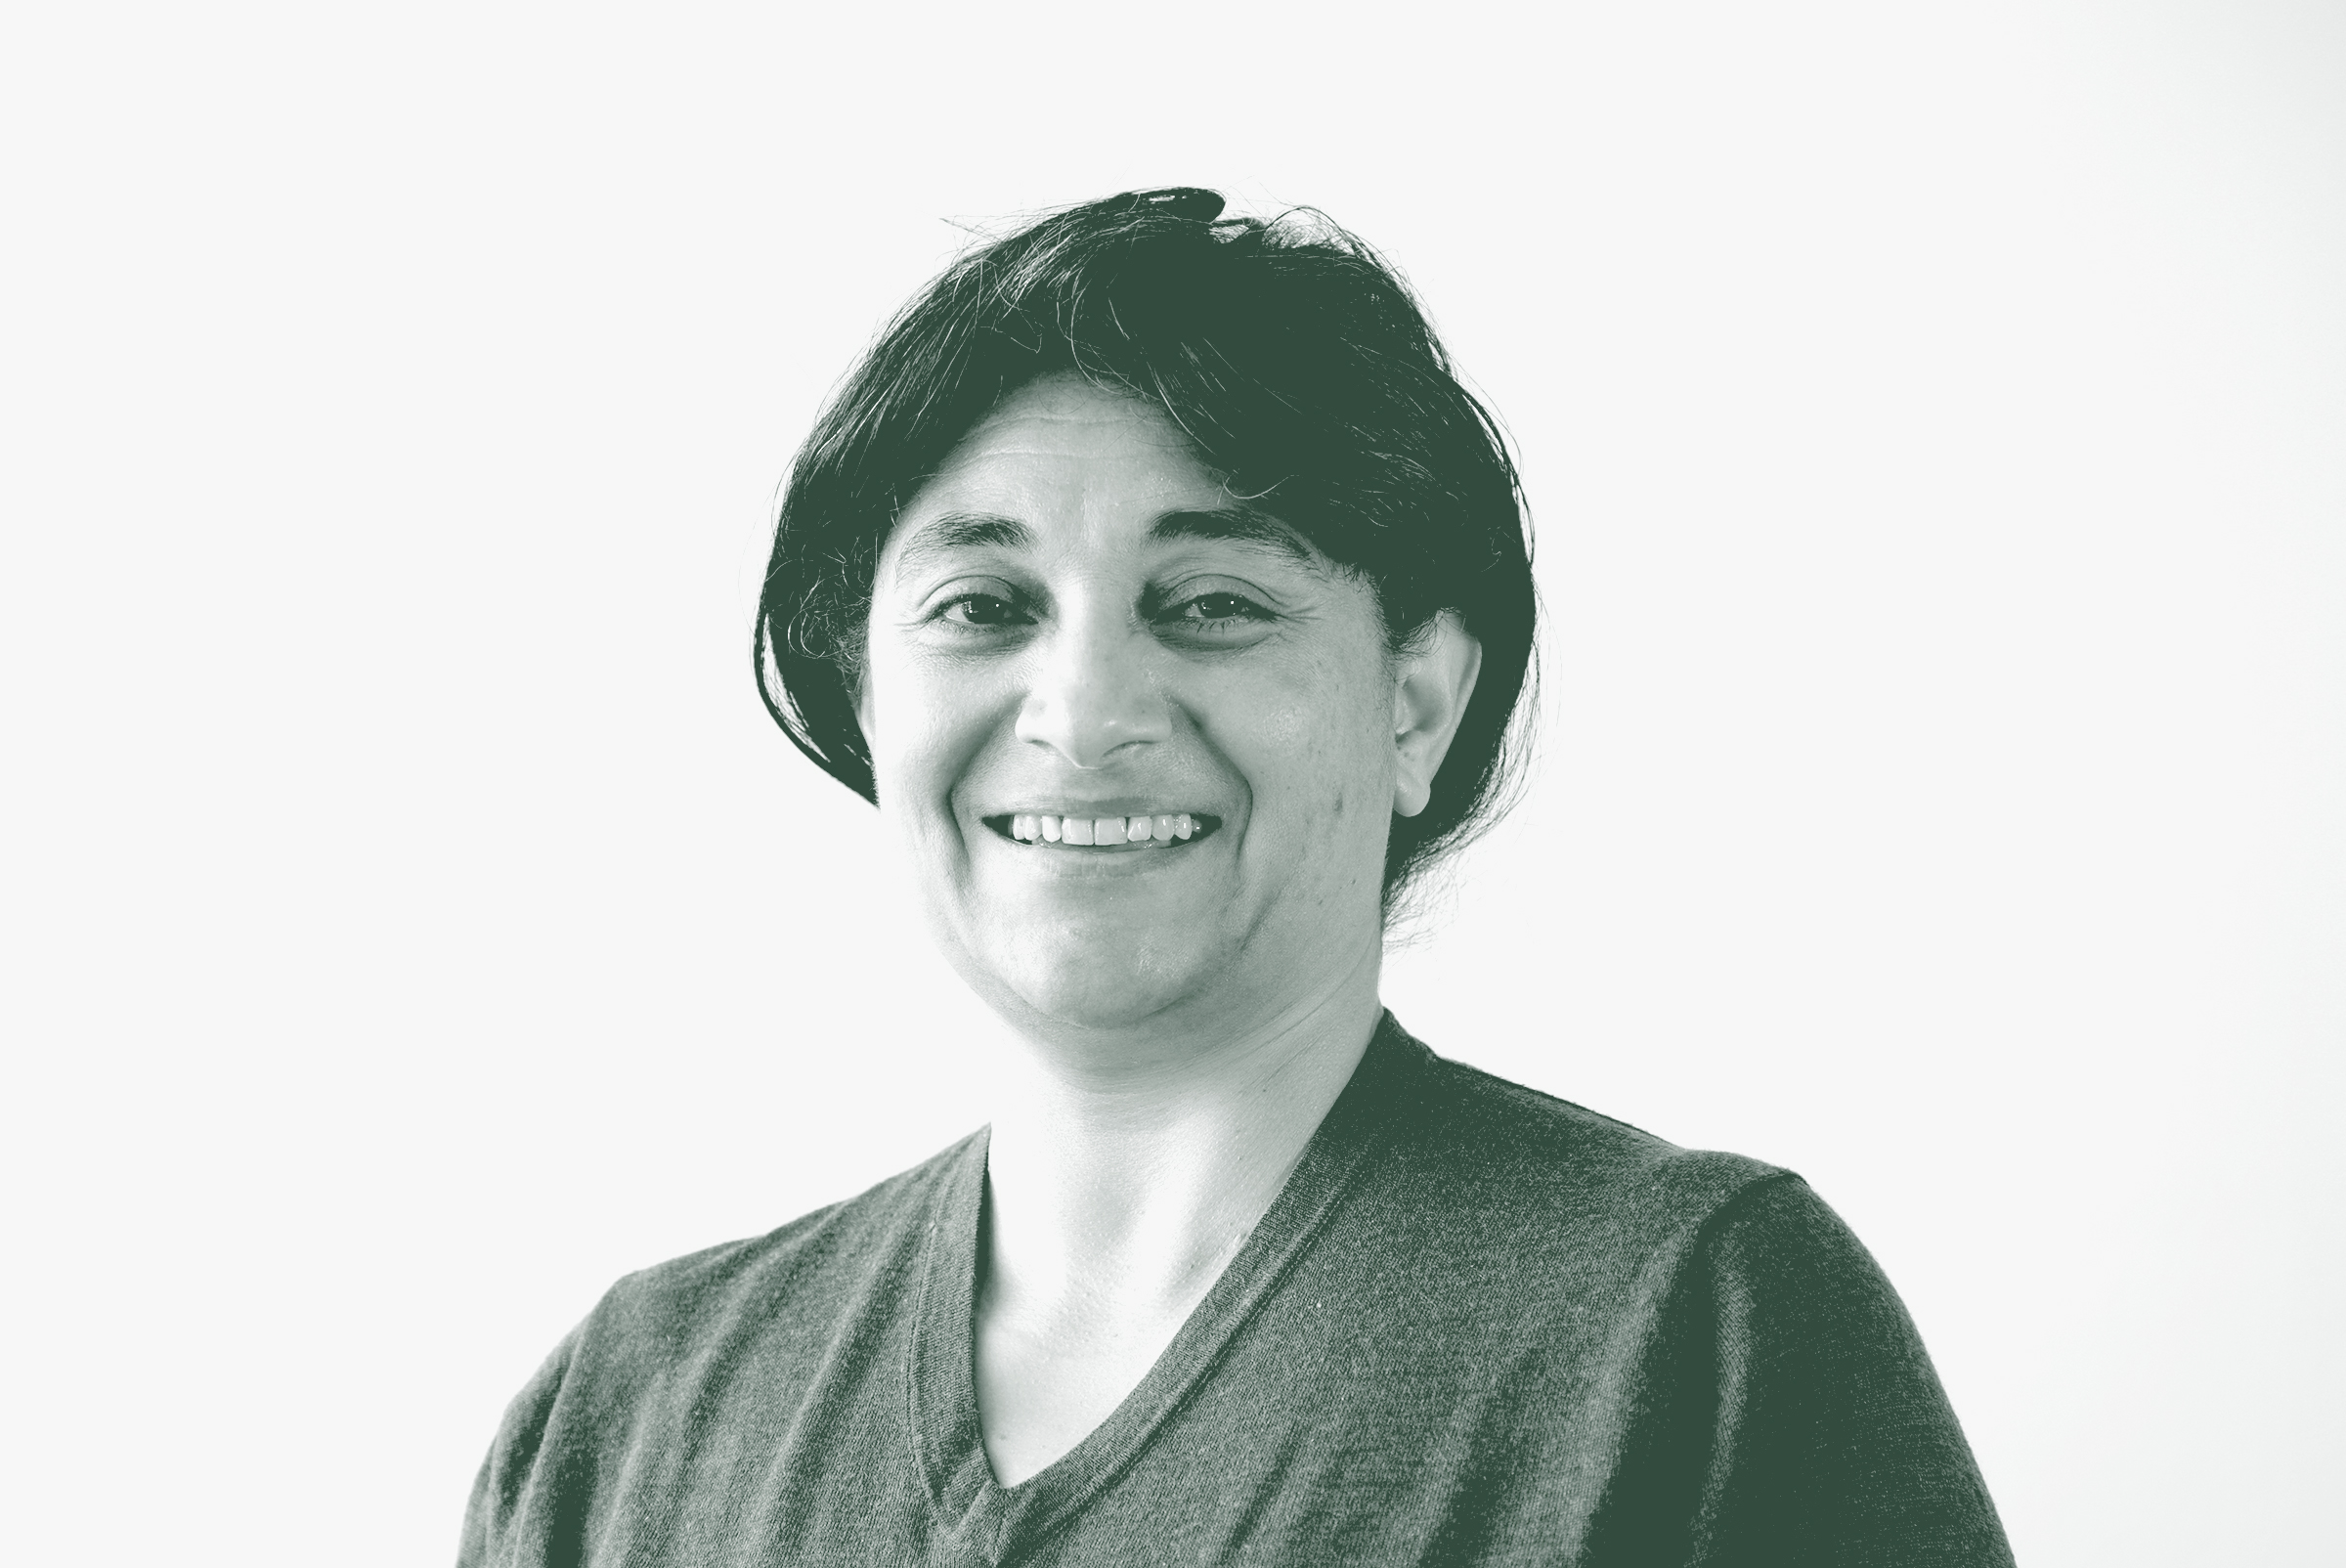 A black and white portrait of Nardine Mansi, an Associate and Senior Project Leader with GFF in the Retail Studio, in front of a white background.